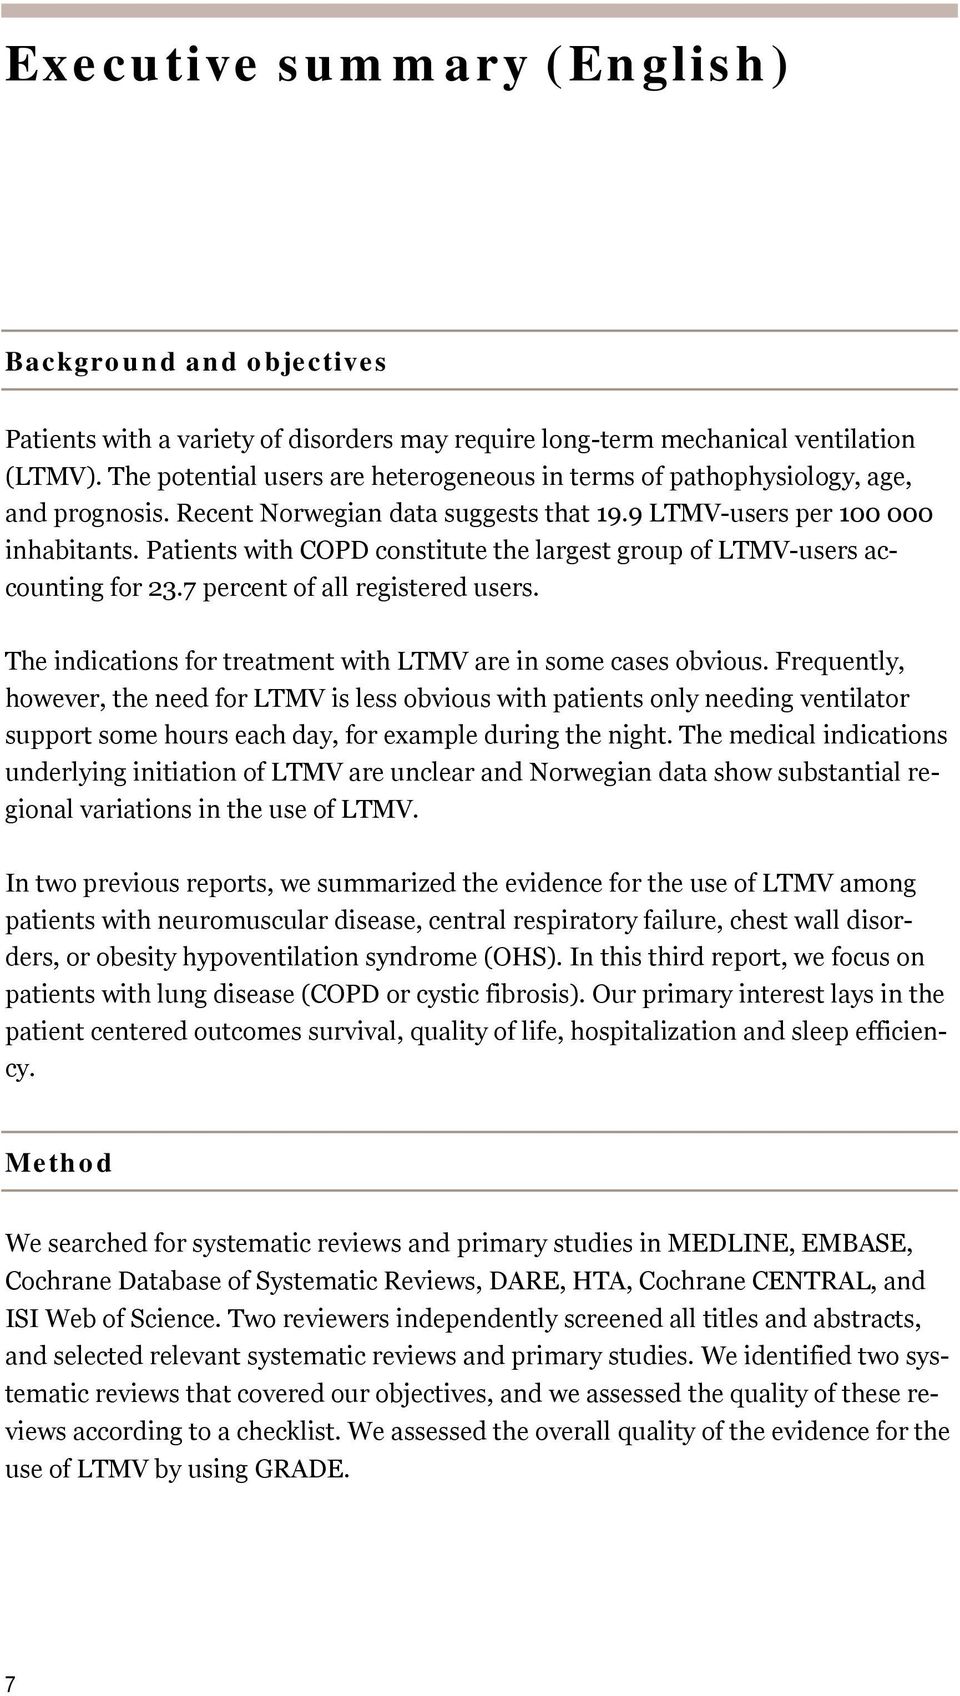 Patients with COPD constitute the largest group of LTMV-users accounting for 23.7 percent of all registered users. The indications for treatment with LTMV are in some cases obvious.